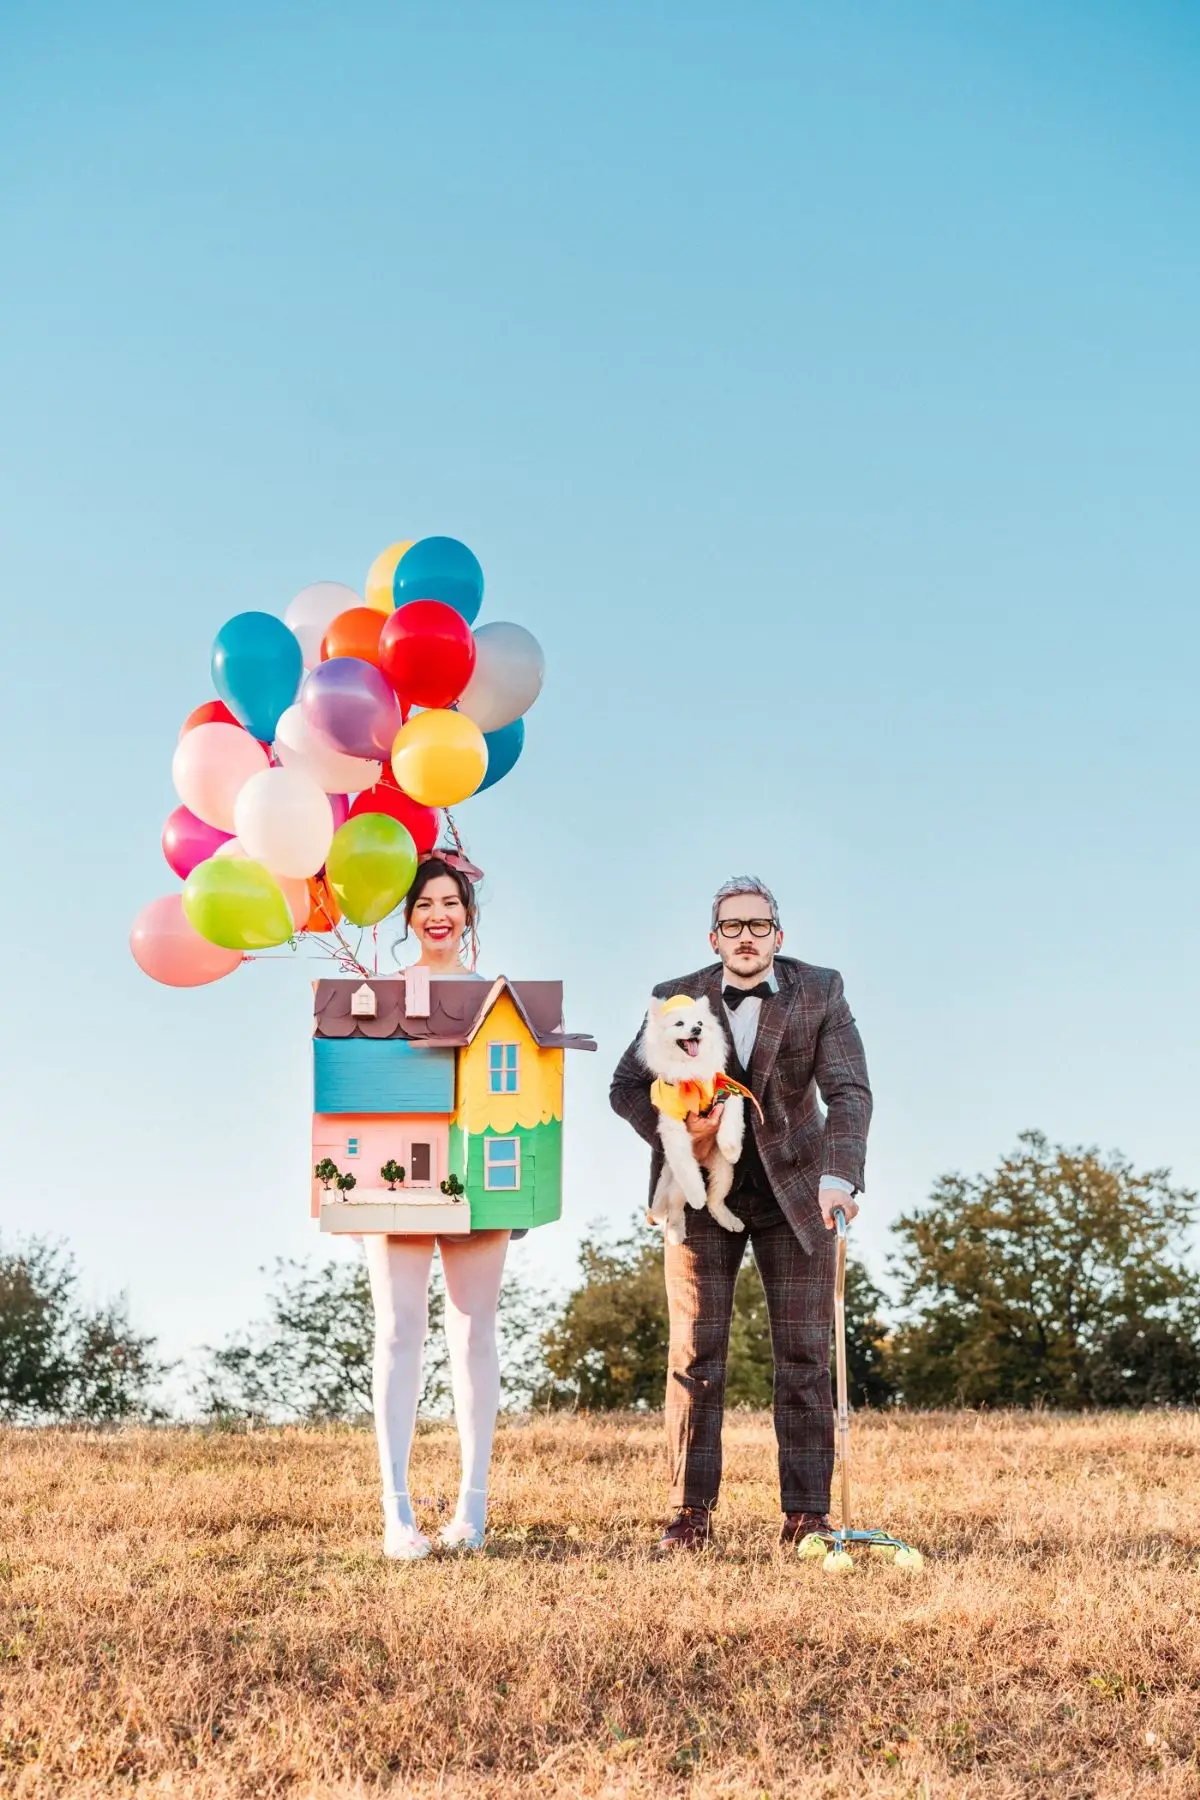 Up House and Carl couples costumes